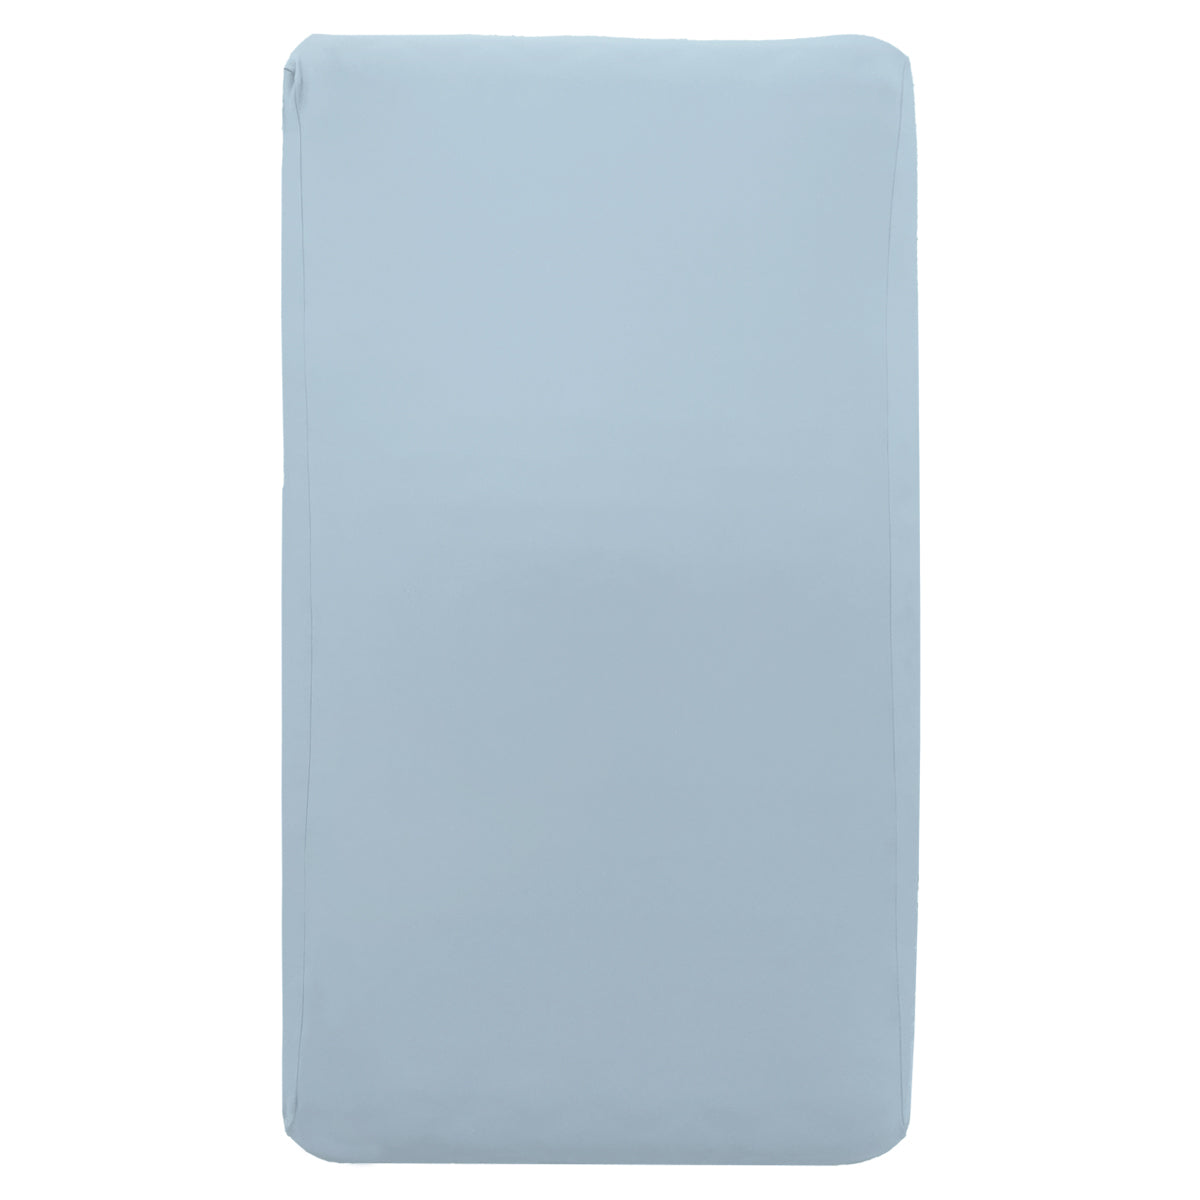 Light Blue - Sensory Fitted Bed Sheet